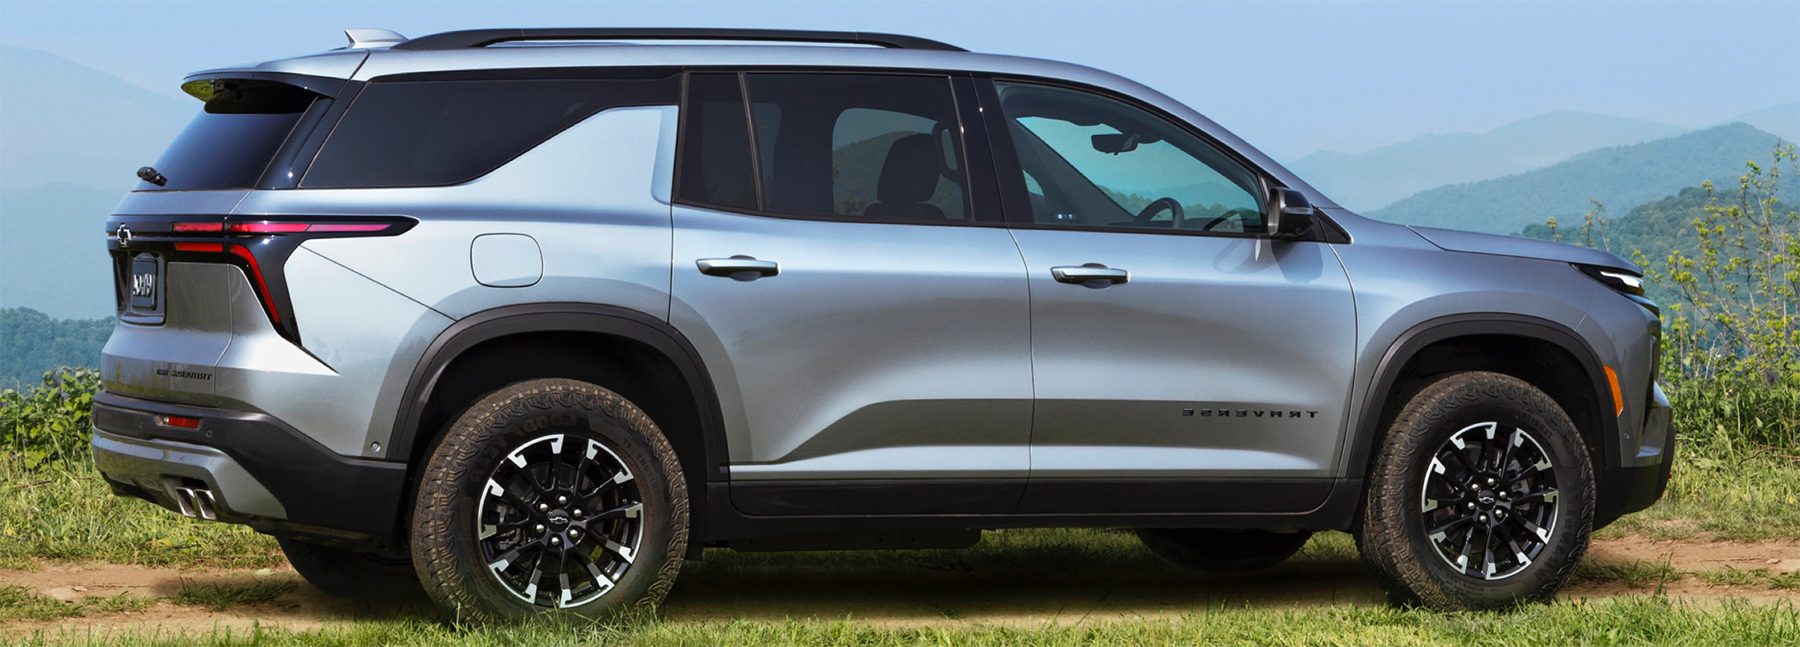 The 2020 chevrolet trailblazer is parked on a dirt road.